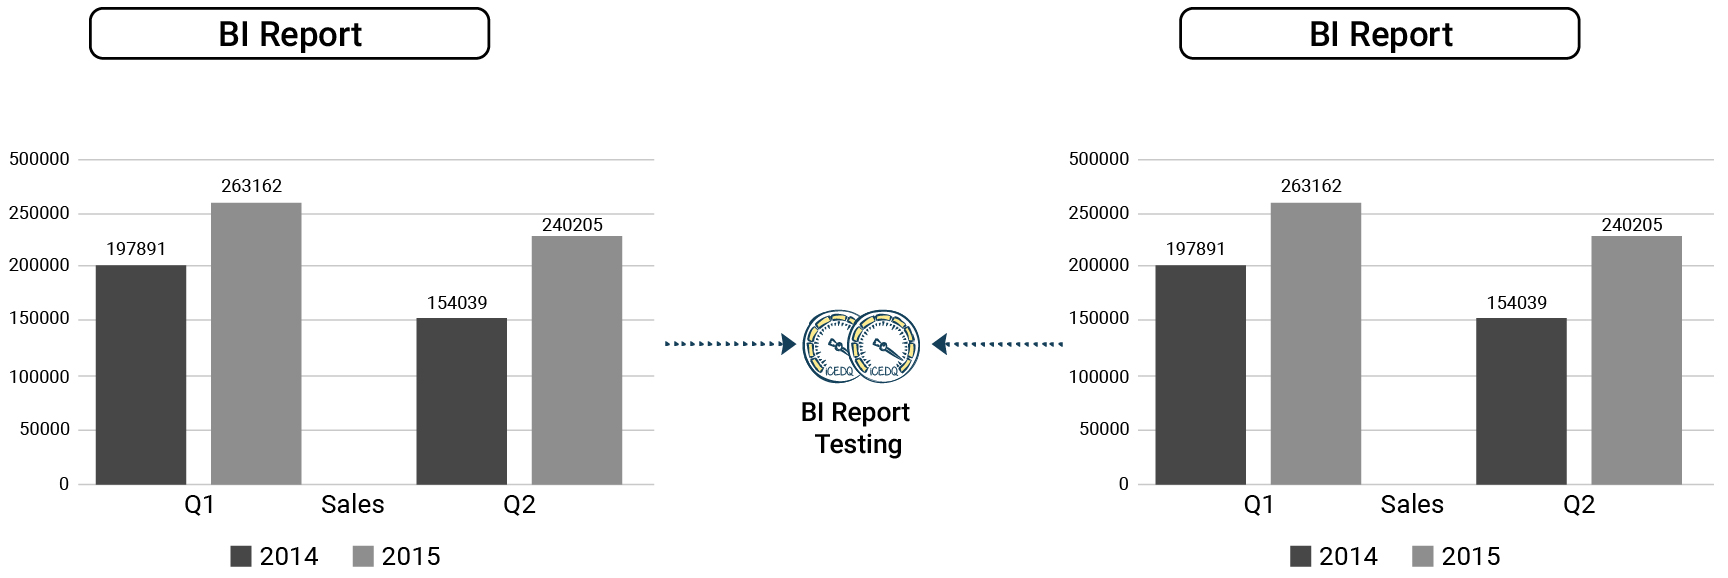 BI report testing can be automated by iCEDQ engine.